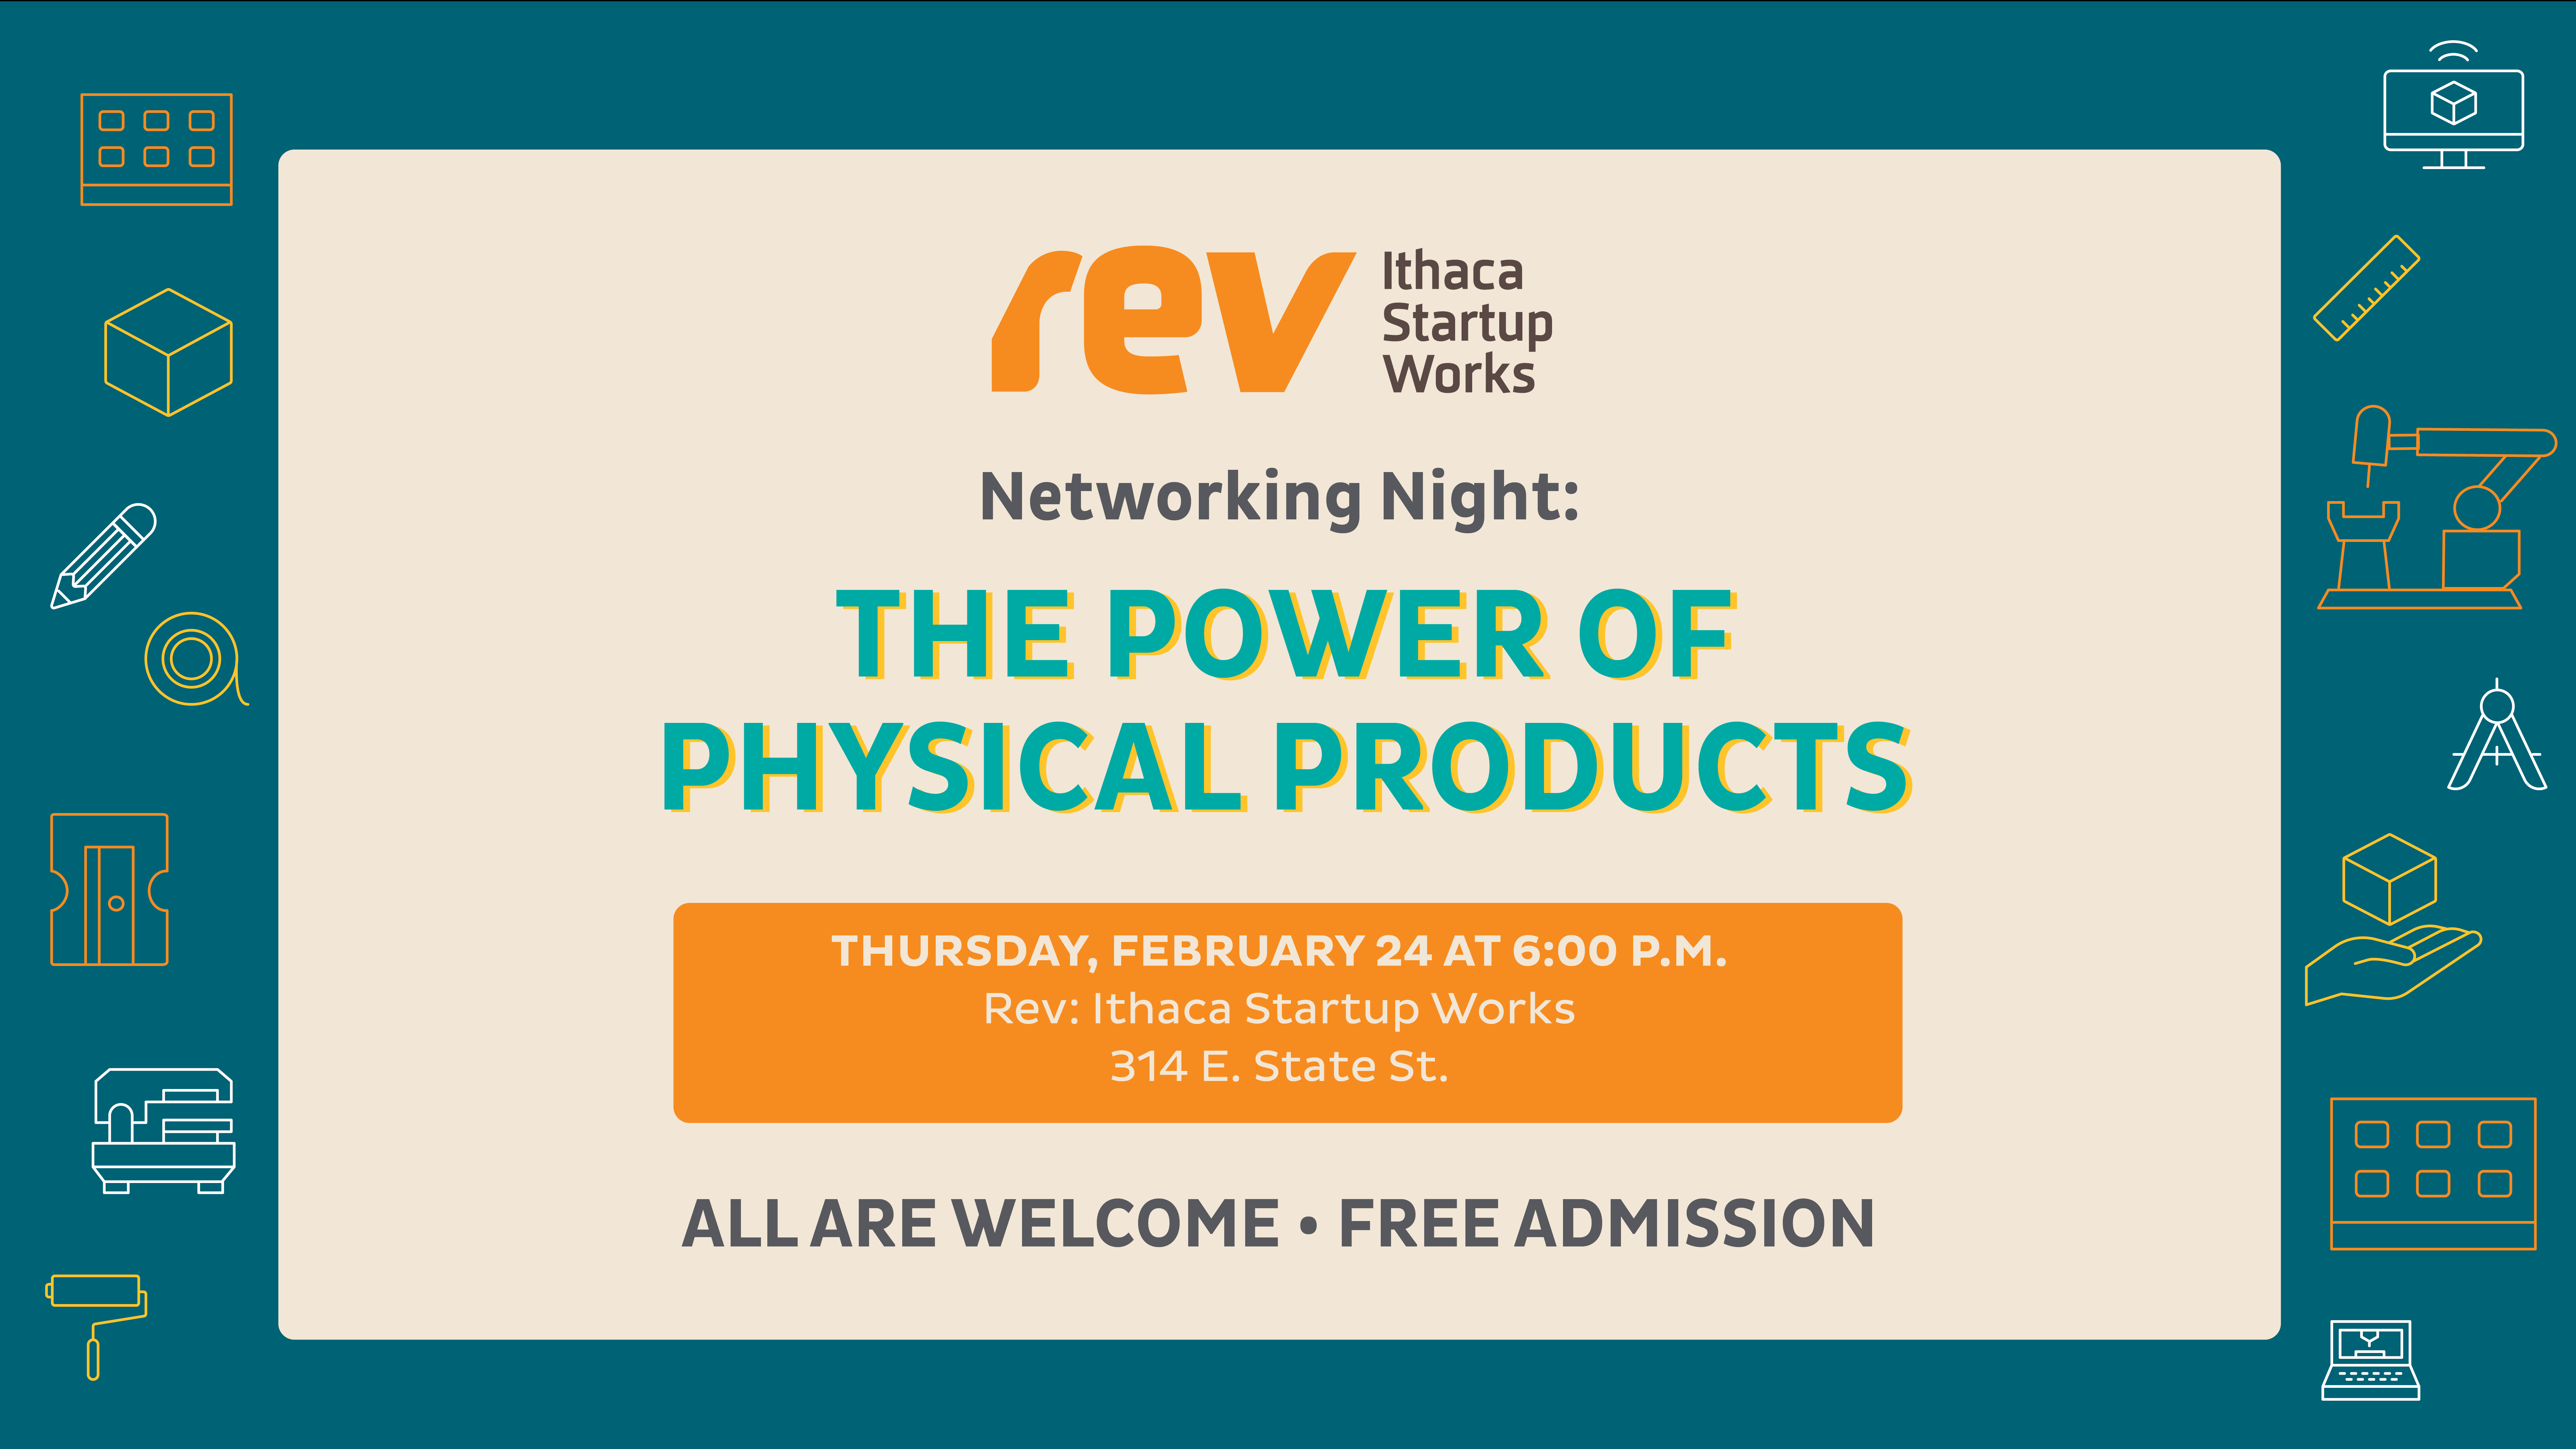 Rev: Ithaca Startup Works. Networking Night: The Power of Physical Products. Thursday, February 24 at 6:00 p.m. EST. Rev: Ithaca Startup Works (314 E. State Street). All are welcome. Free admission.